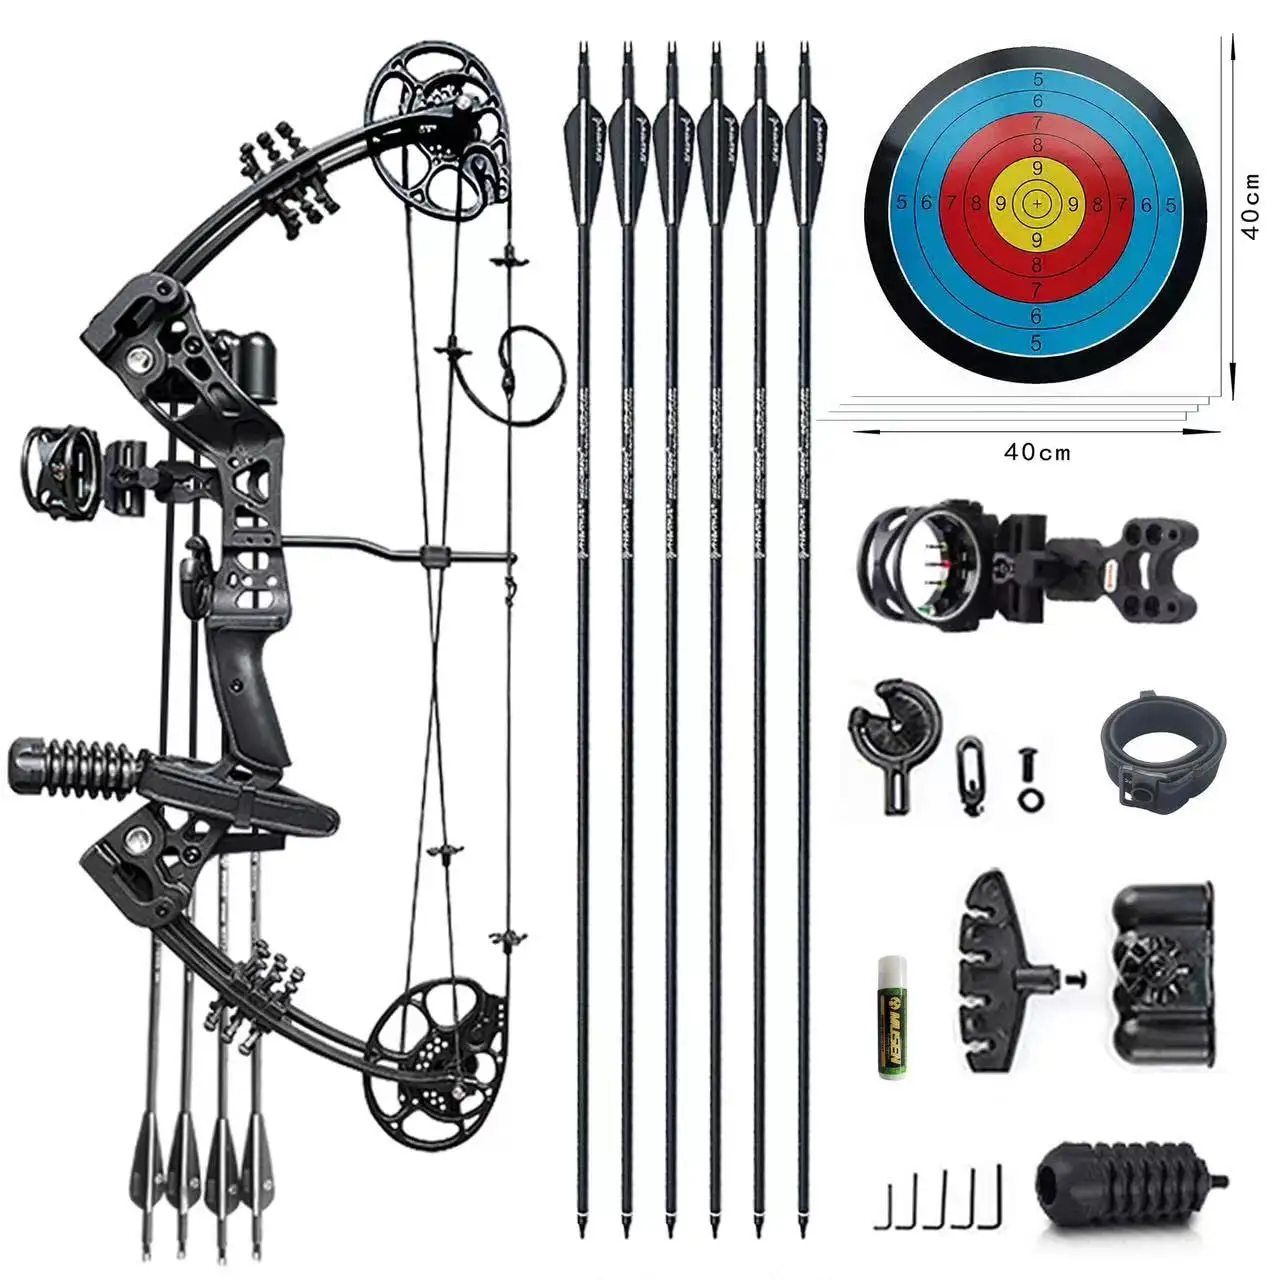 Adjustable Bow and Arrow Archery Compound Bow Archery Set for Pull Beginner and Teens